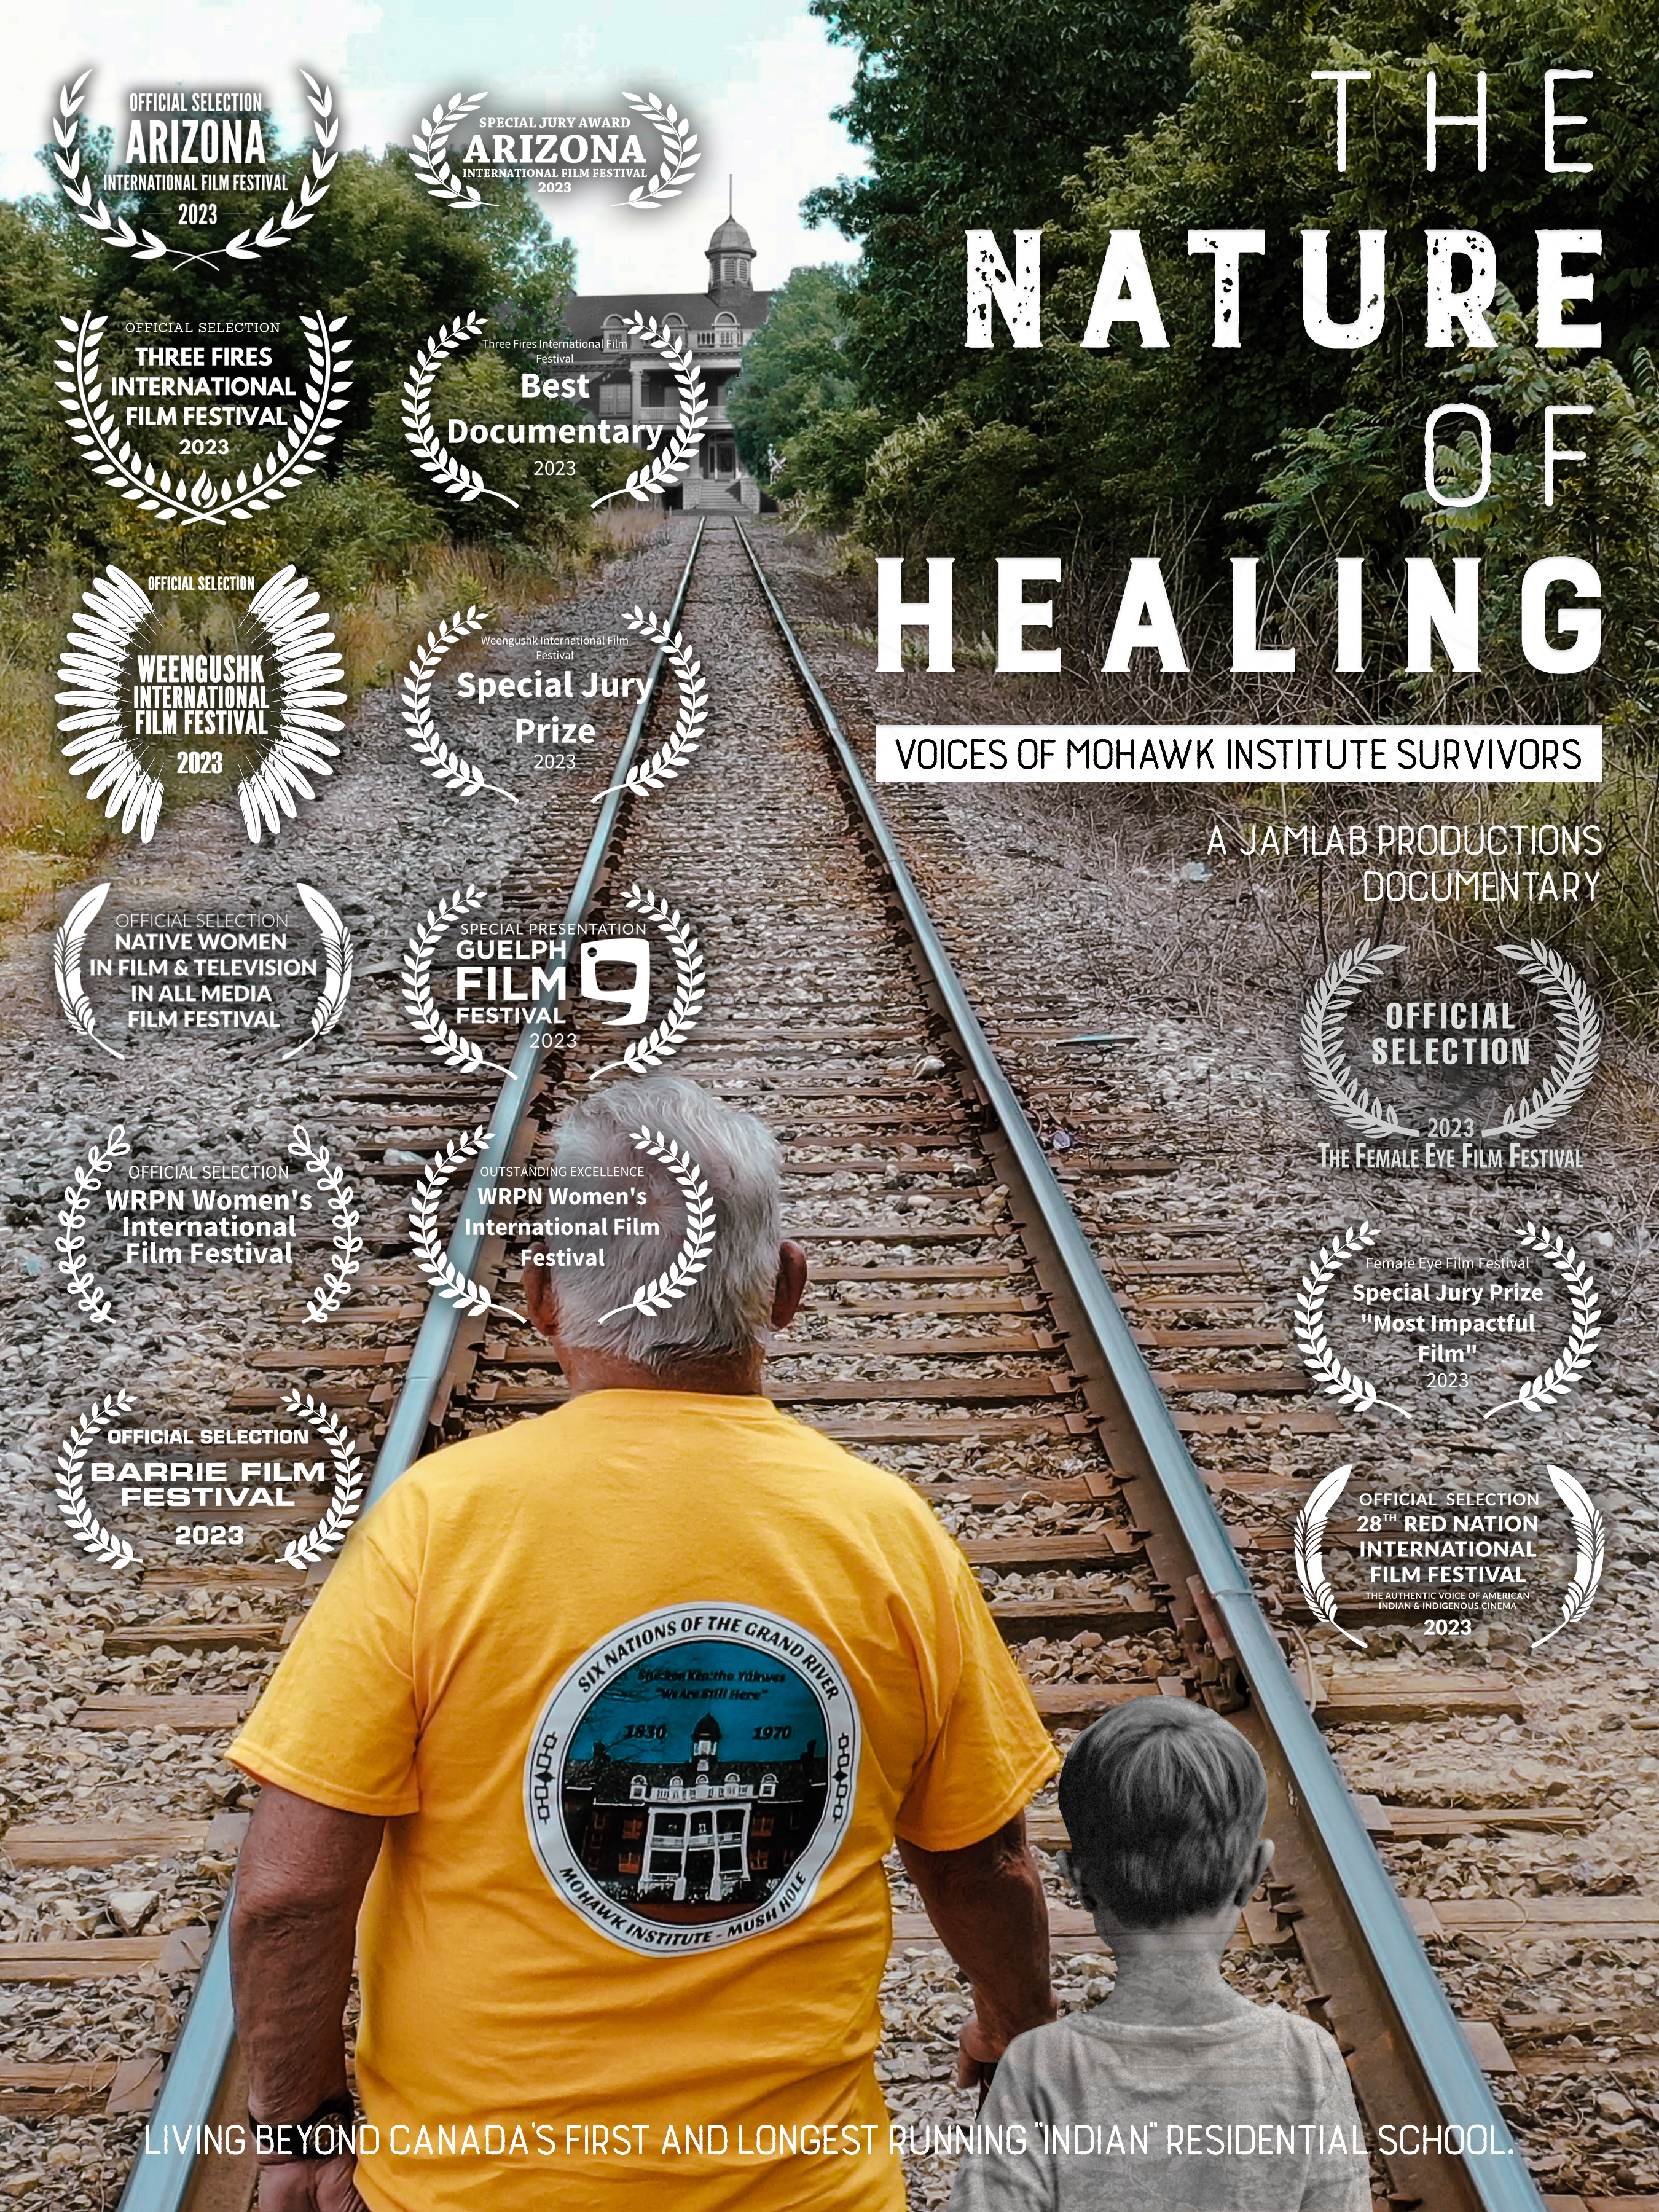 The Nature of Healing News Release